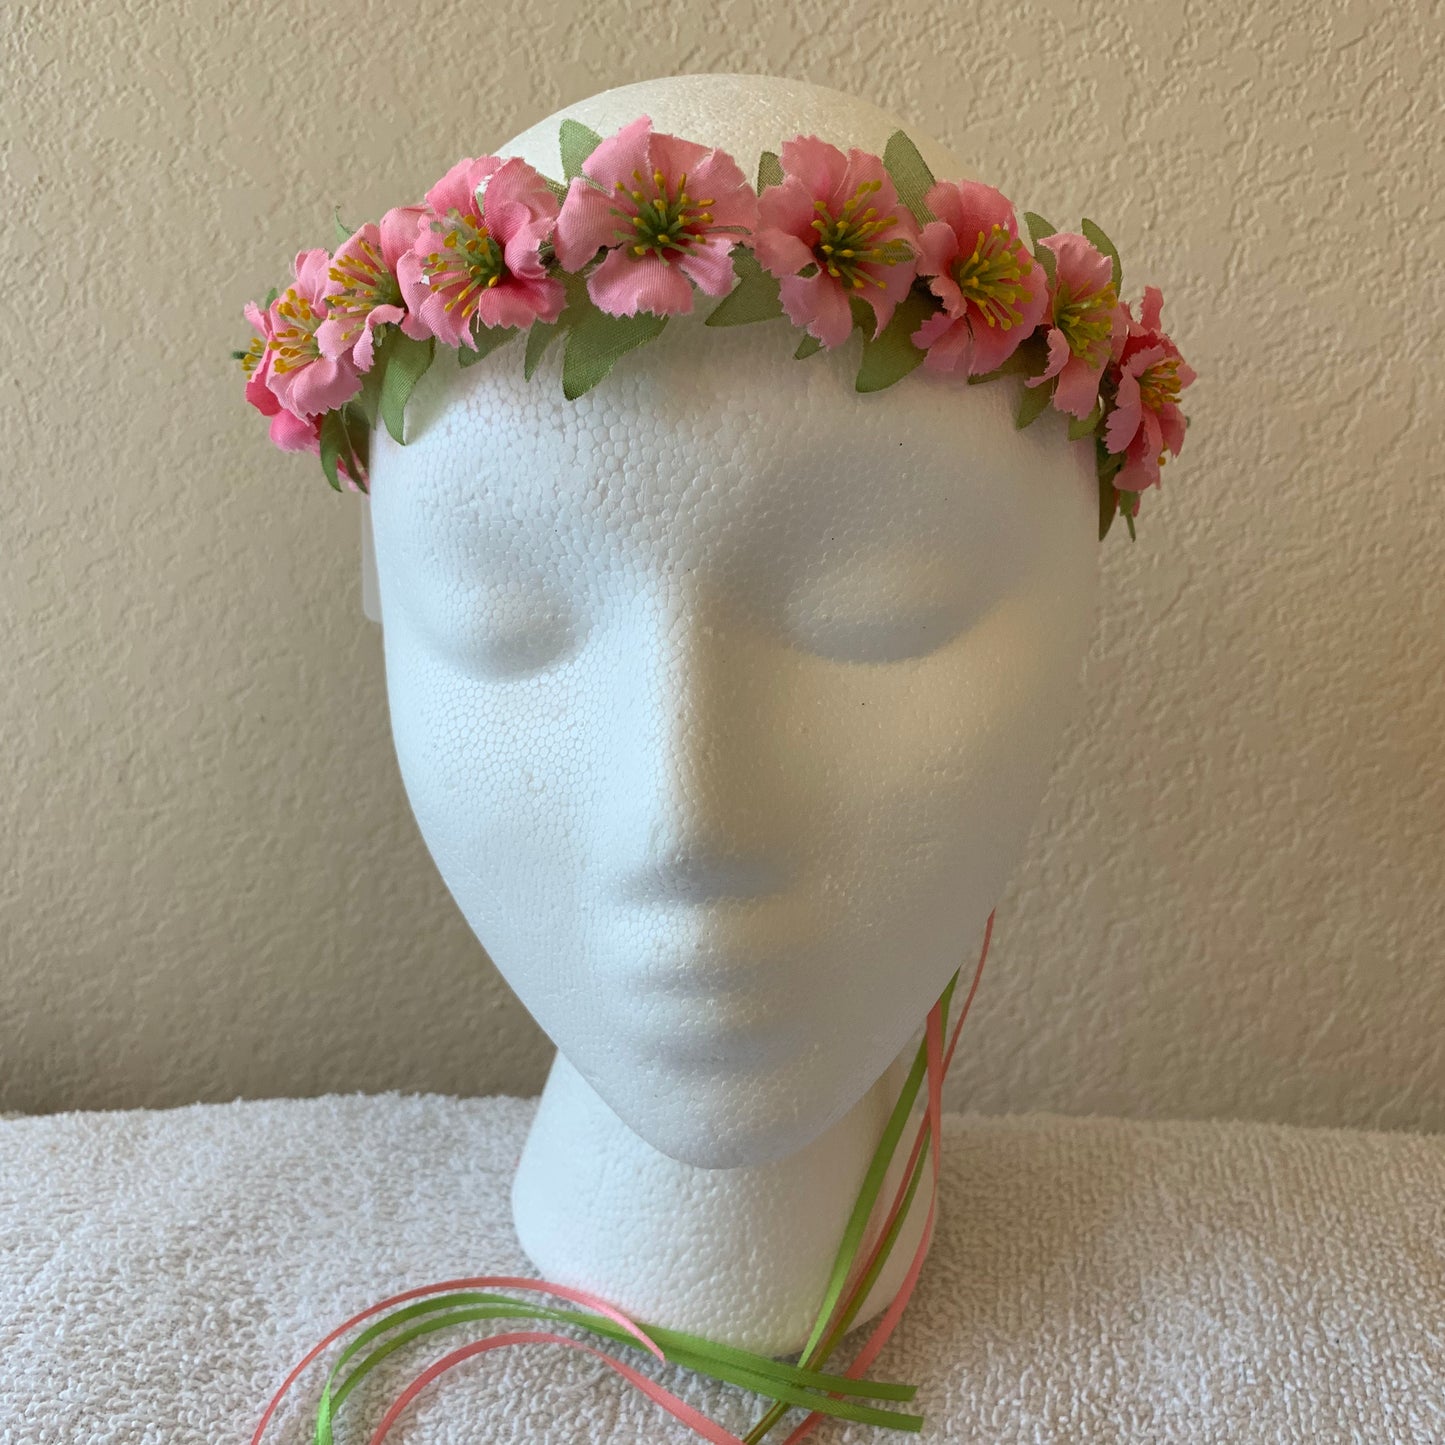 Extra Small Wreath - All pink flowers+